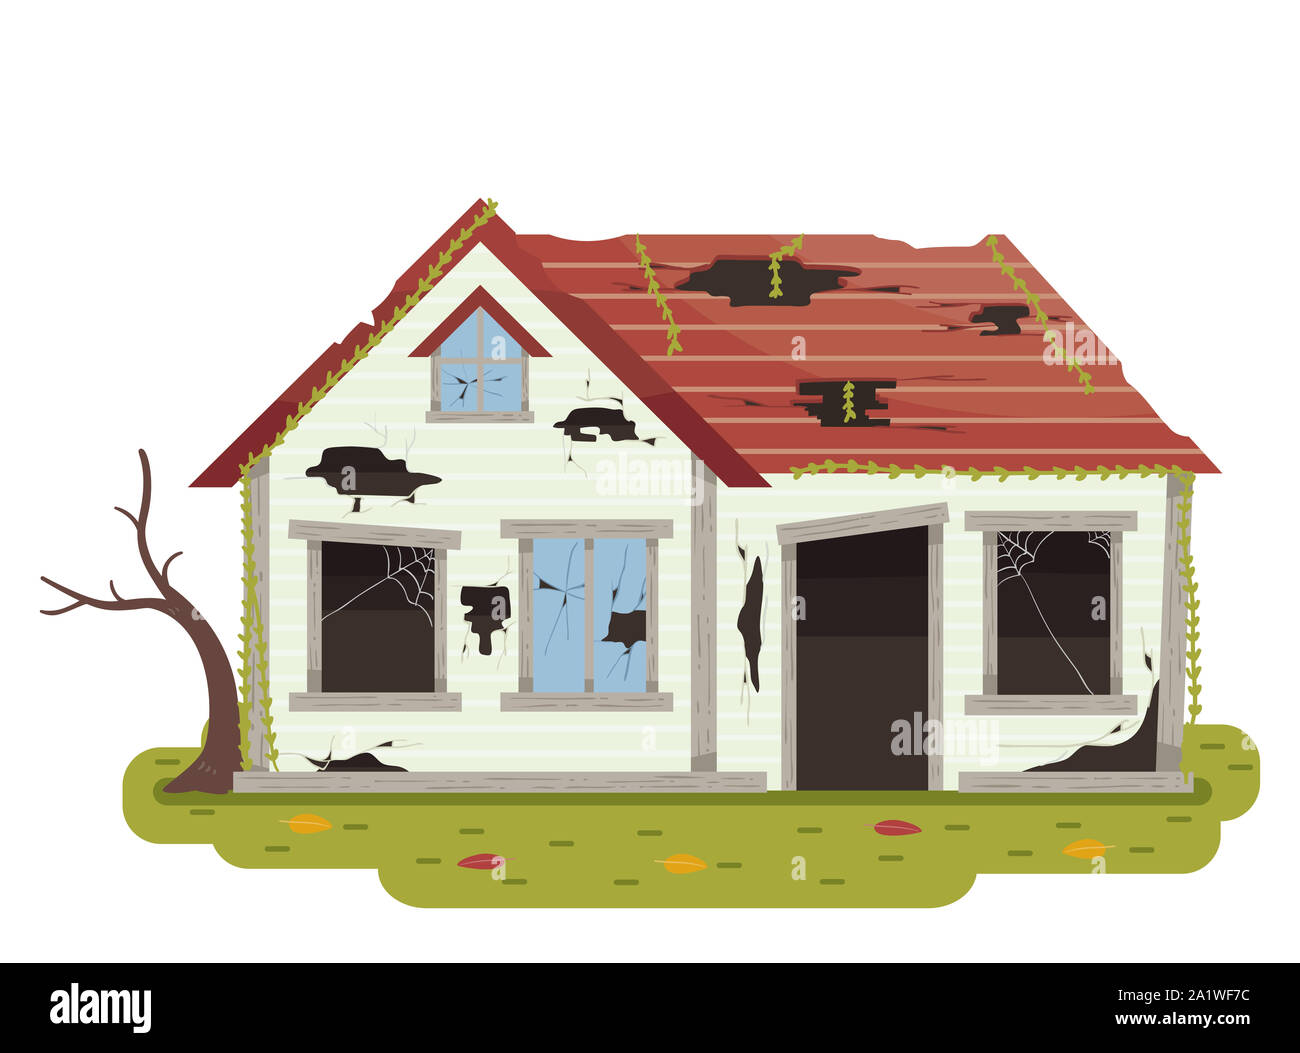 Illustration of an Abandoned House with Broken Door and Windows, Glasses, Roof and Dead Tree Stock Photo